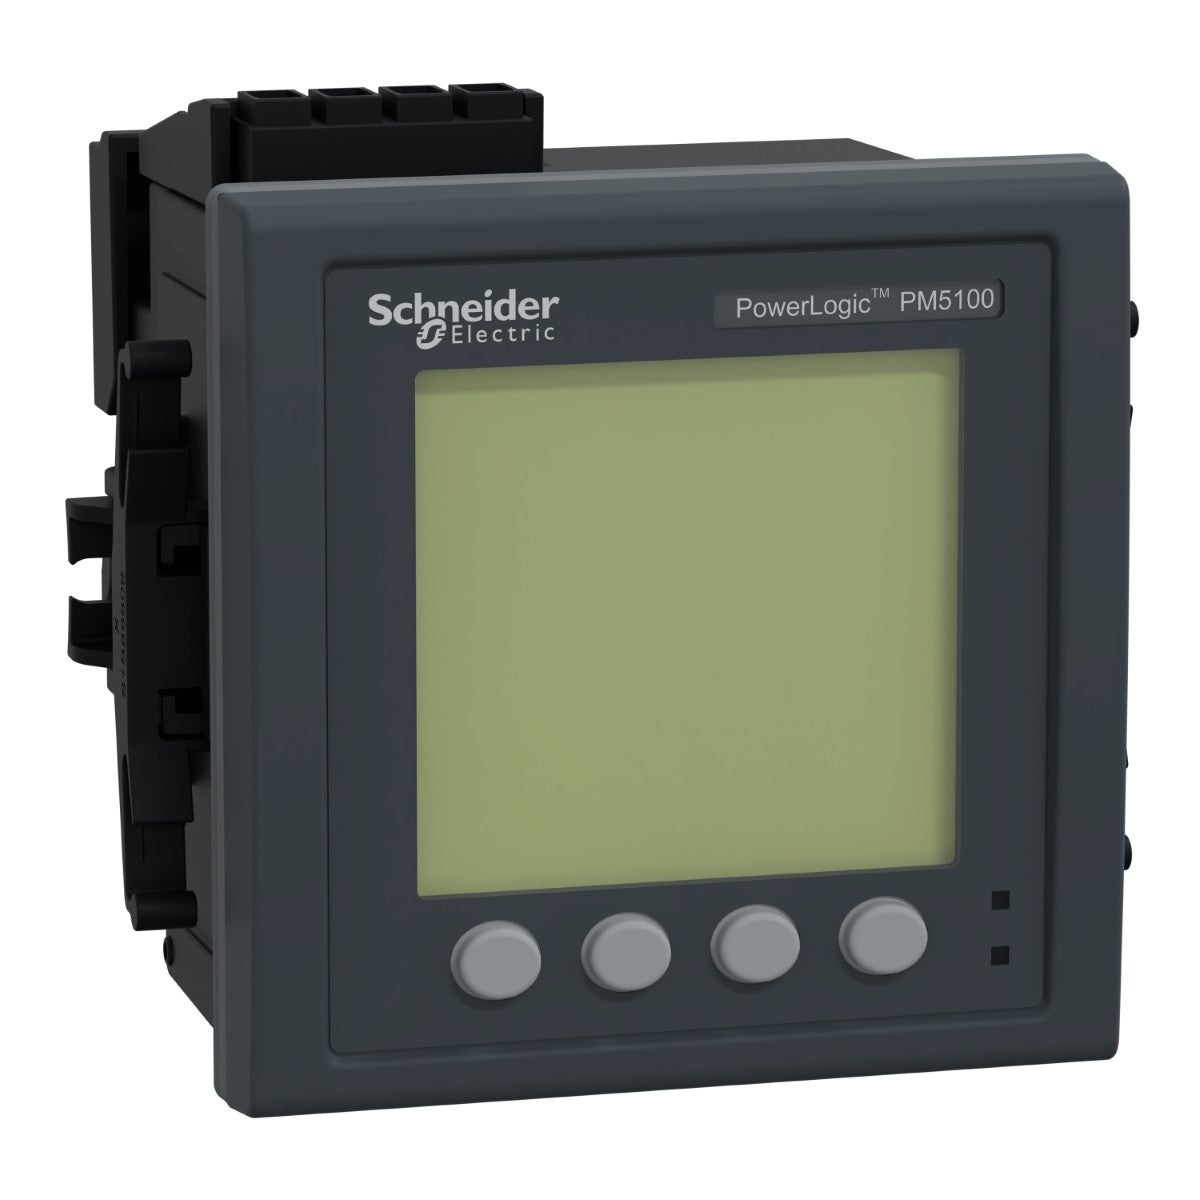 PM5110 Meter, modbus, up to 15th H, 1DO 33 alarms